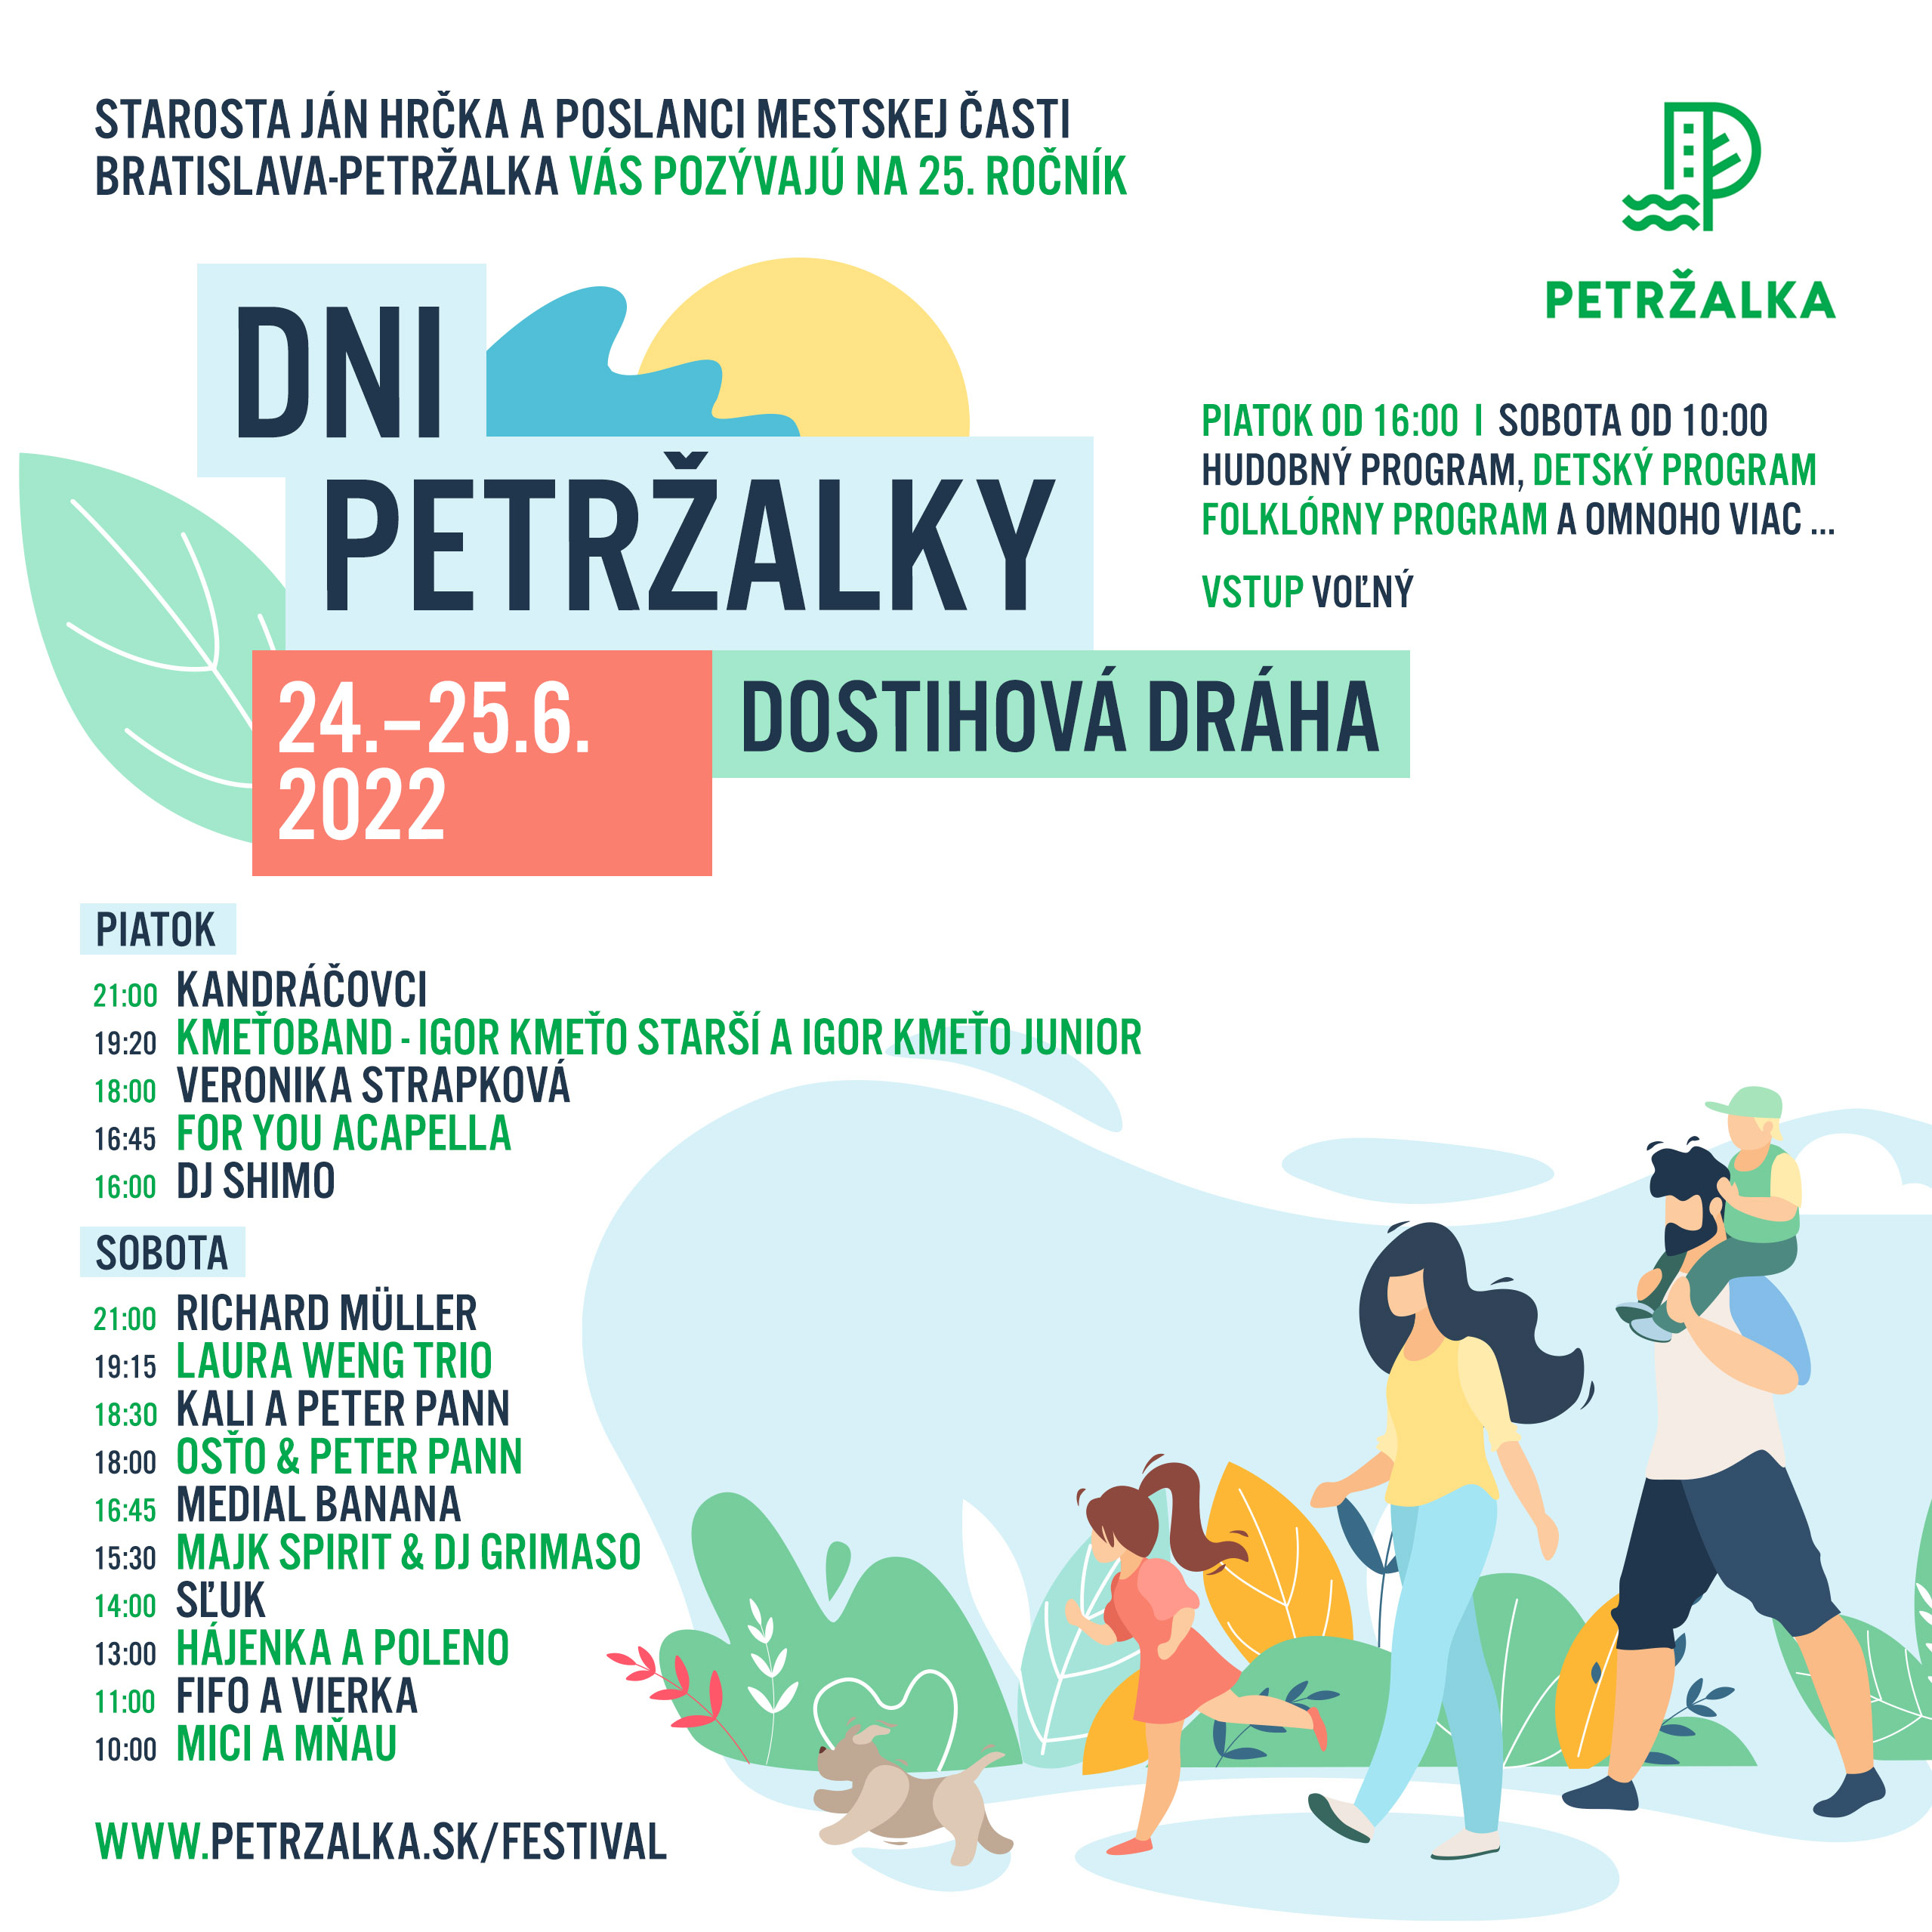 Dni Petralky 2022 - 25. ronk